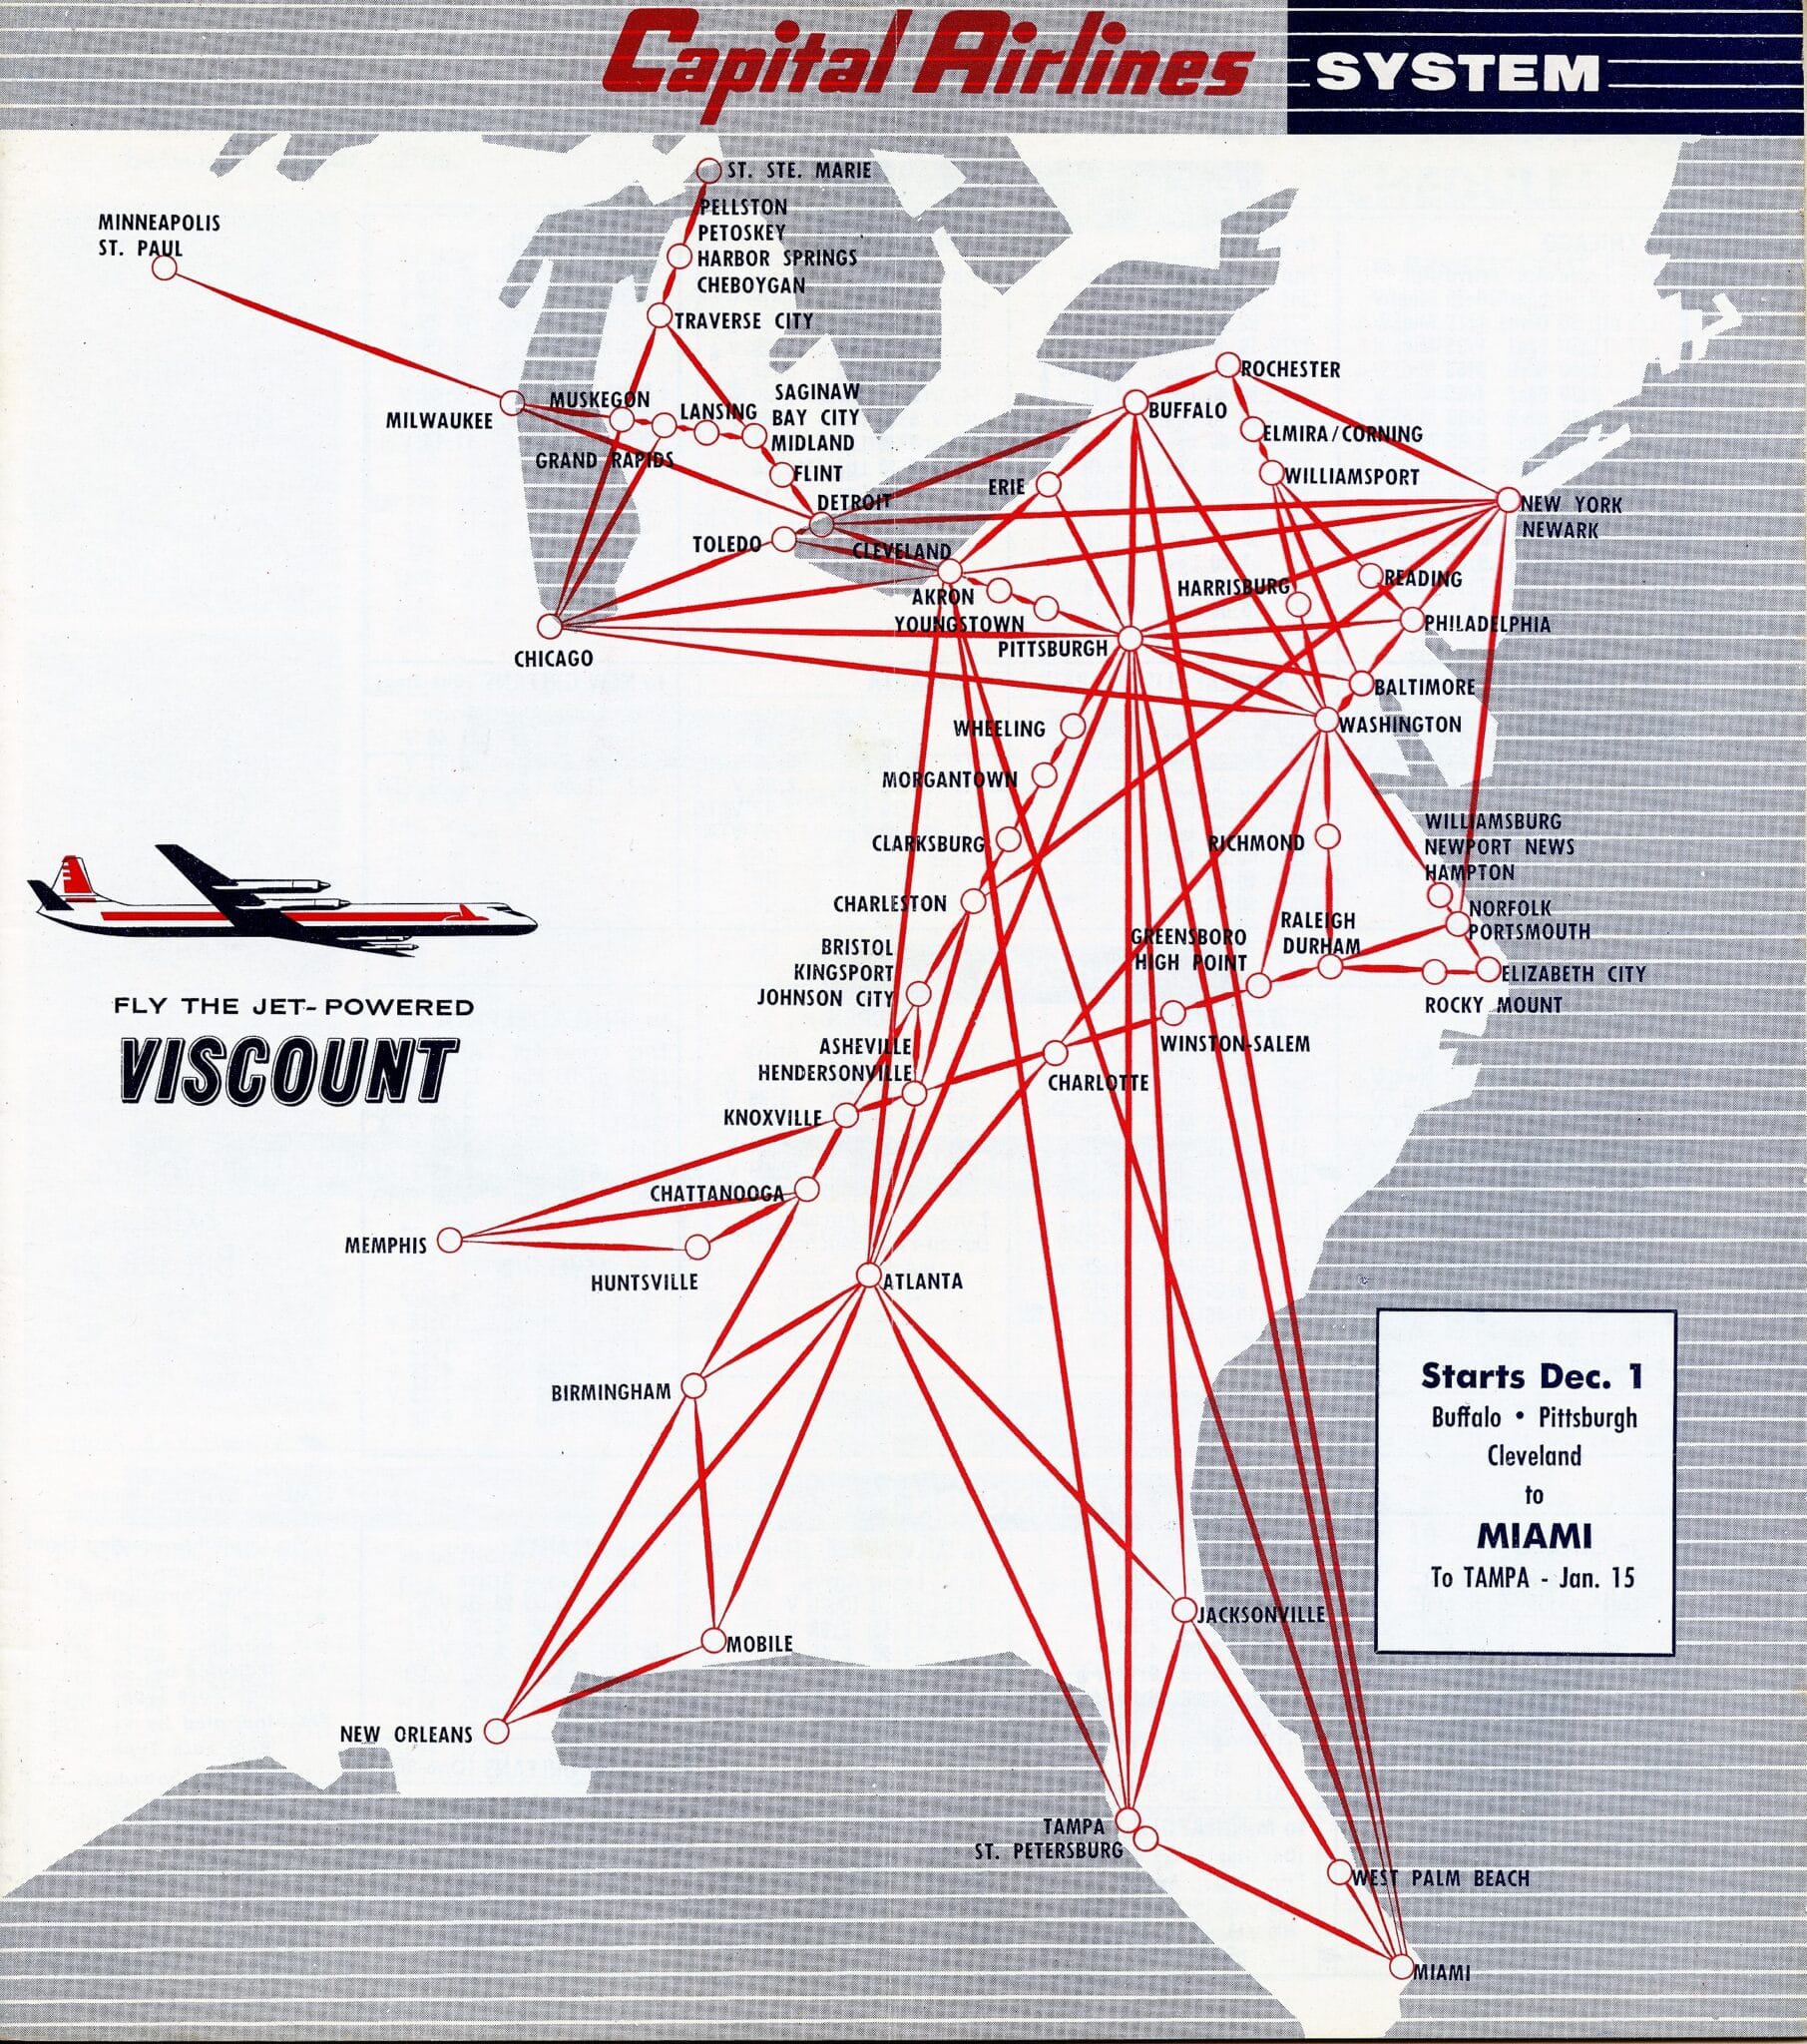 1955: America Welcomes the Viscount, the World's First Turboprop